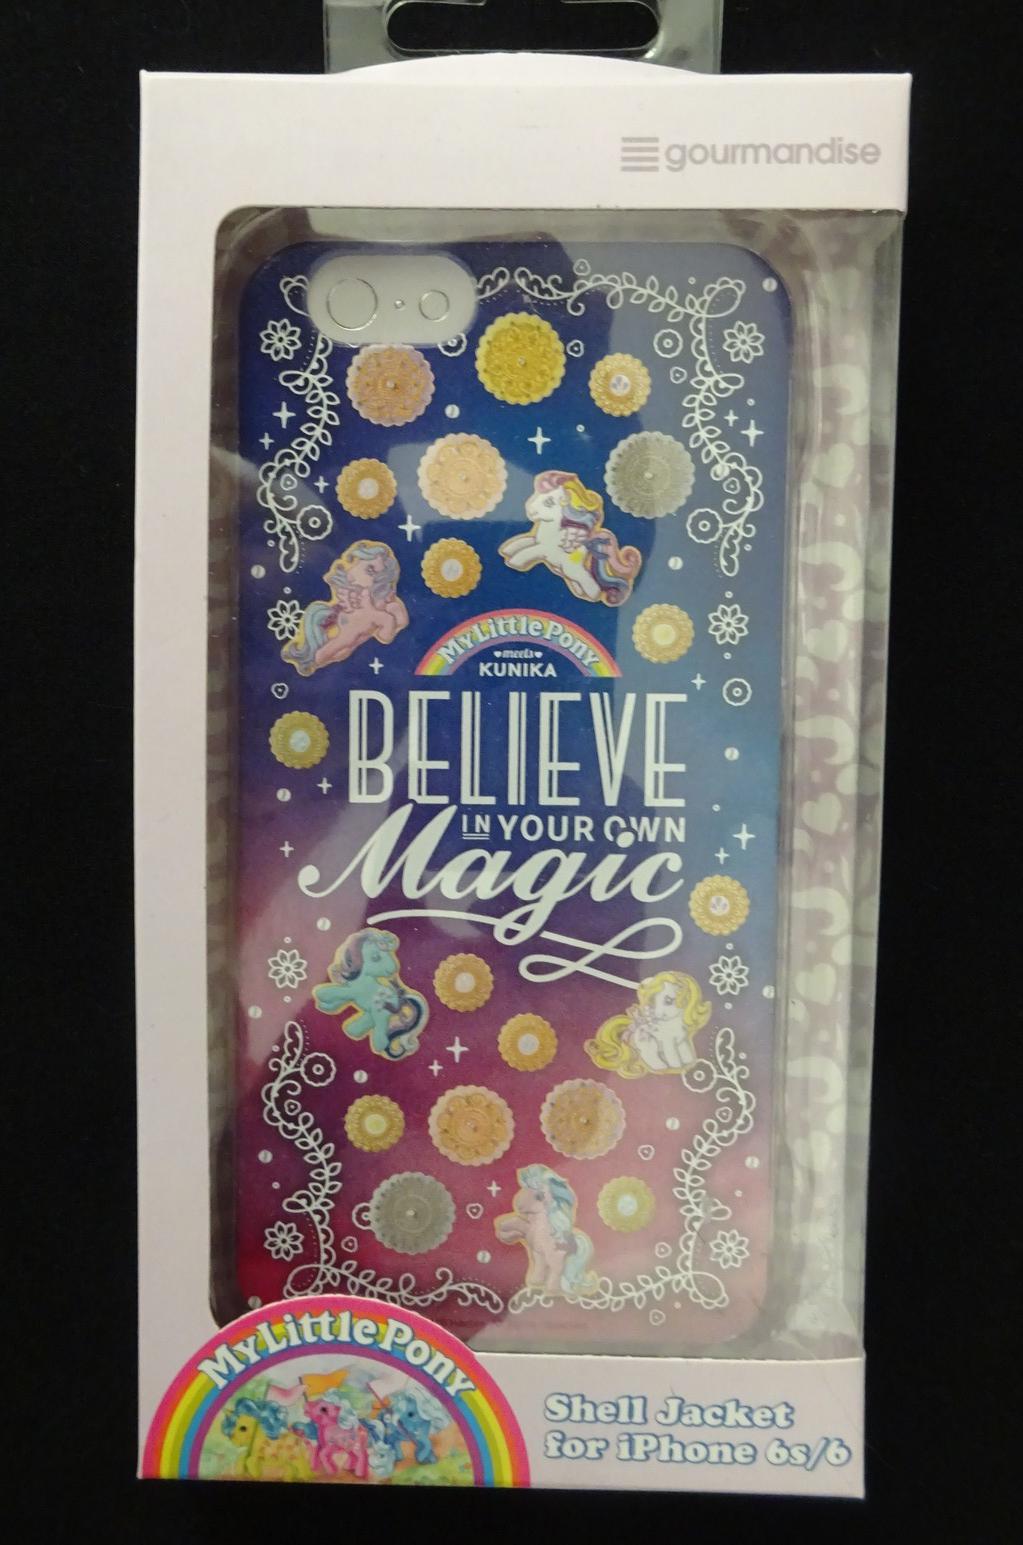 Phone case from Japan